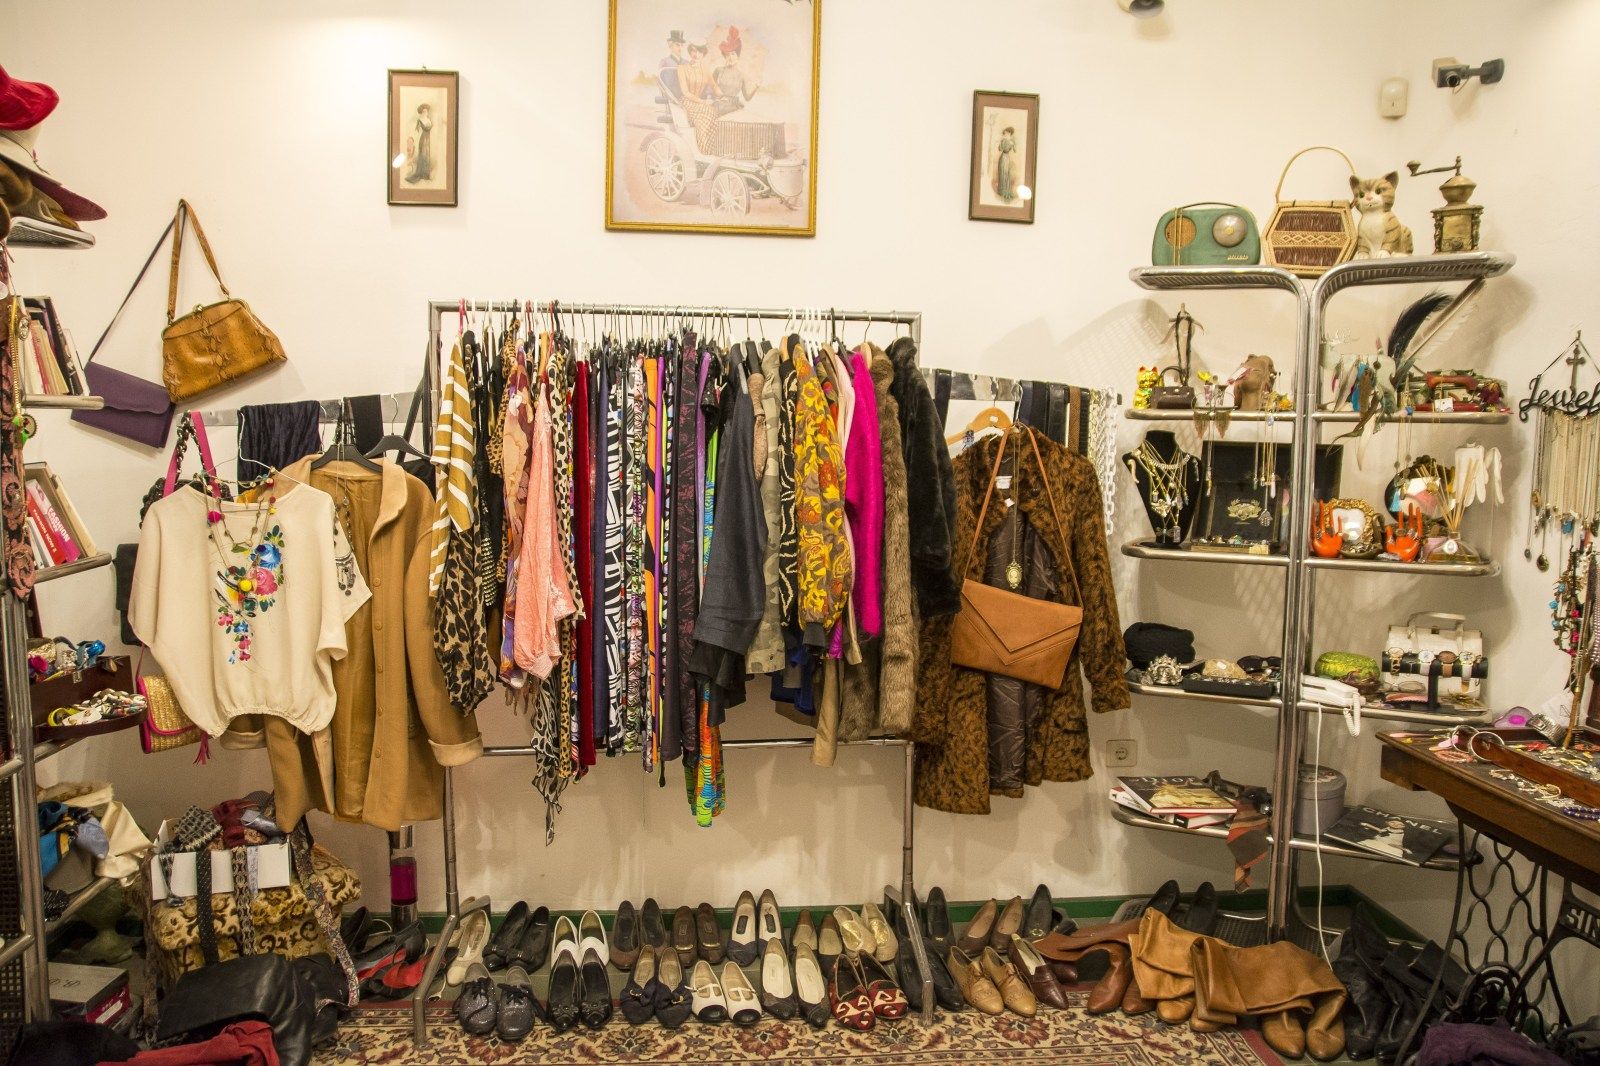 Don Don Down on Wednesday Second-hand Clothing Shops in Japan 4